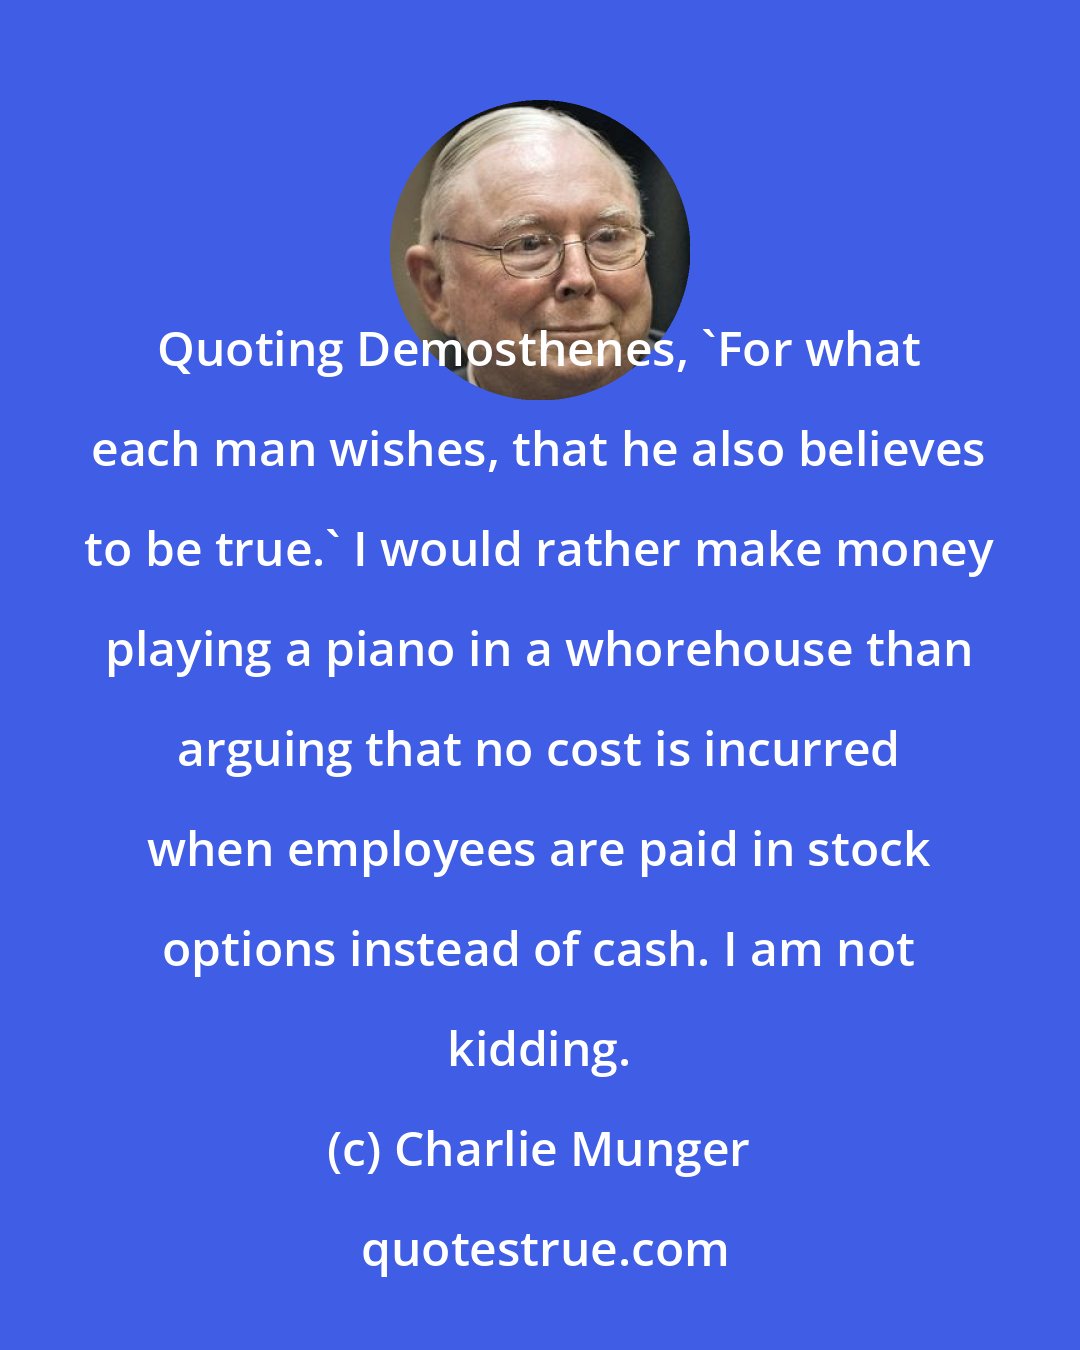 Charlie Munger: Quoting Demosthenes, 'For what each man wishes, that he also believes to be true.' I would rather make money playing a piano in a whorehouse than arguing that no cost is incurred when employees are paid in stock options instead of cash. I am not kidding.